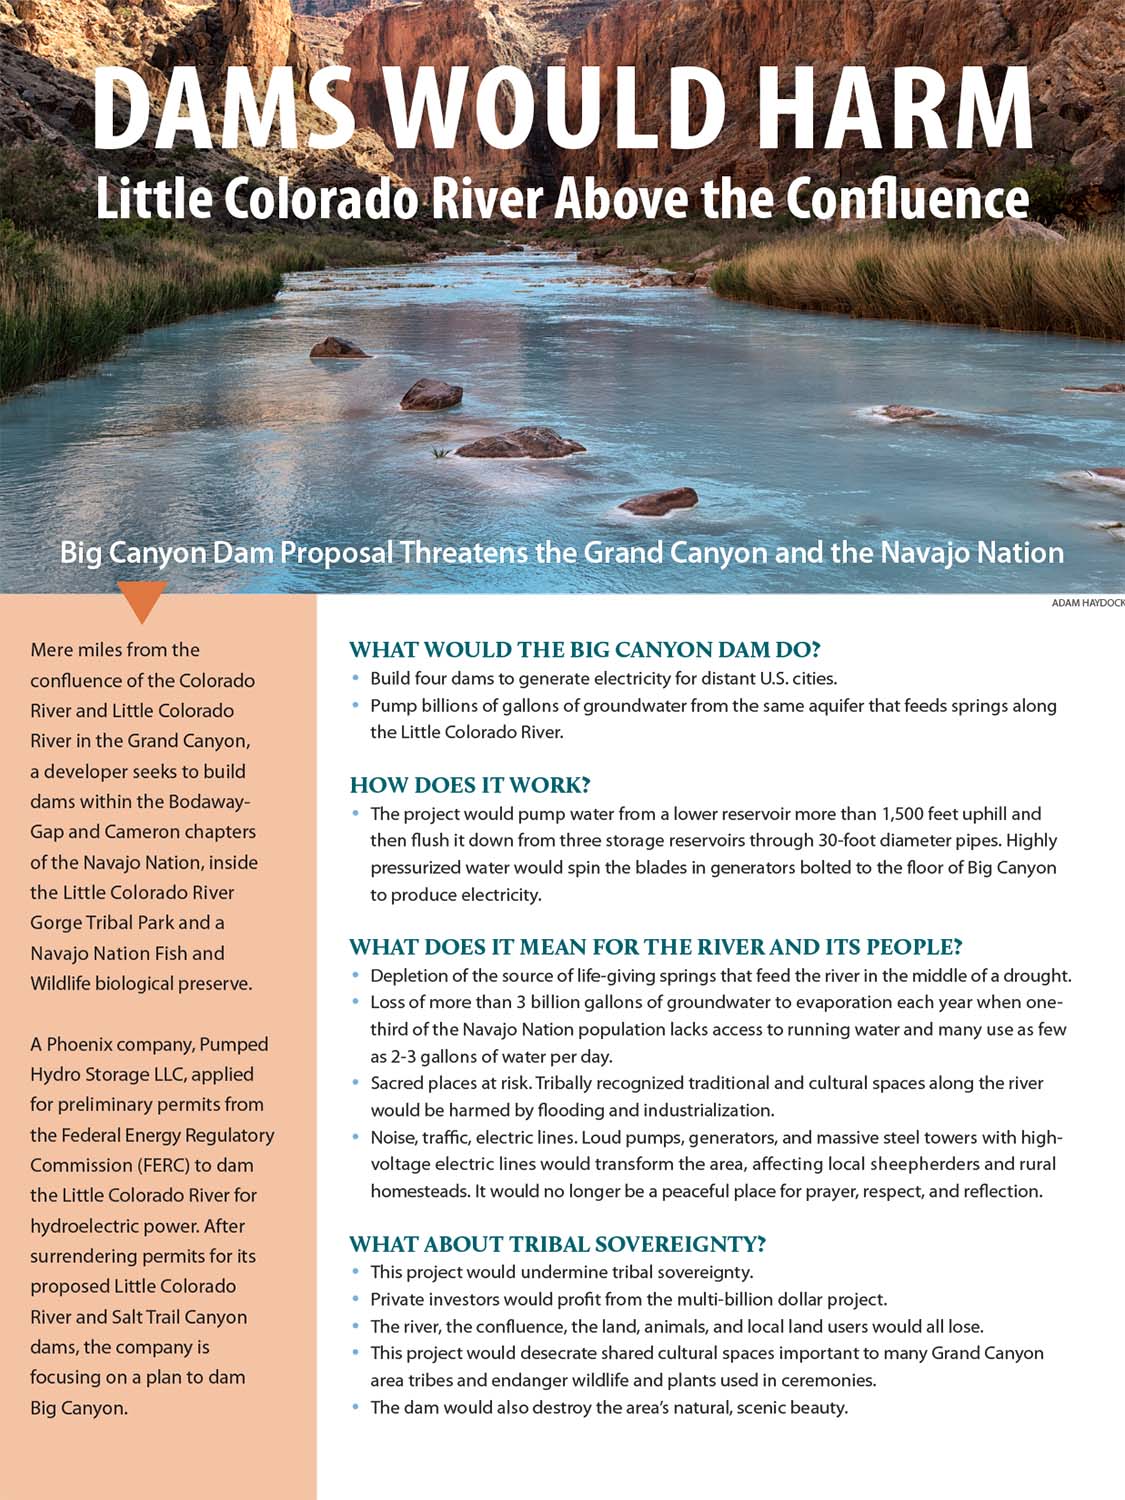 Dams would hurt the Little Colorado River Above the Confluence